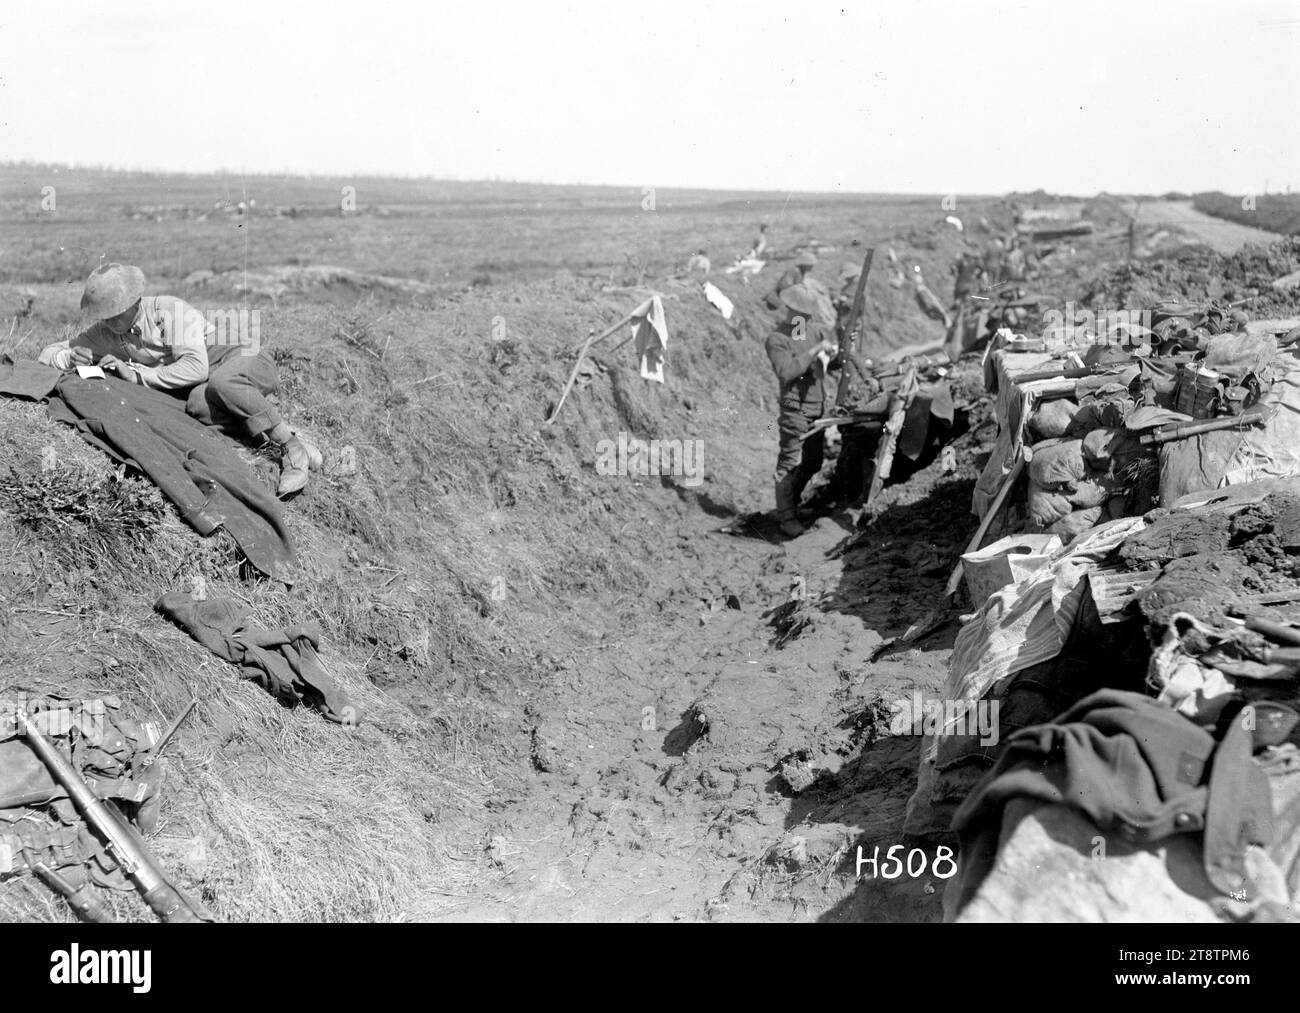 New Zealand troops in the support line at the Western Front, New Zealand soldiers shown in the support line waiting to go up to the front line. Some sleep in funk holes while one soldier cleans his rifle. Another lies on a bank above the trench. Photograph taken Colincamps 15 April 1918 Armytage Sanders Stock Photo